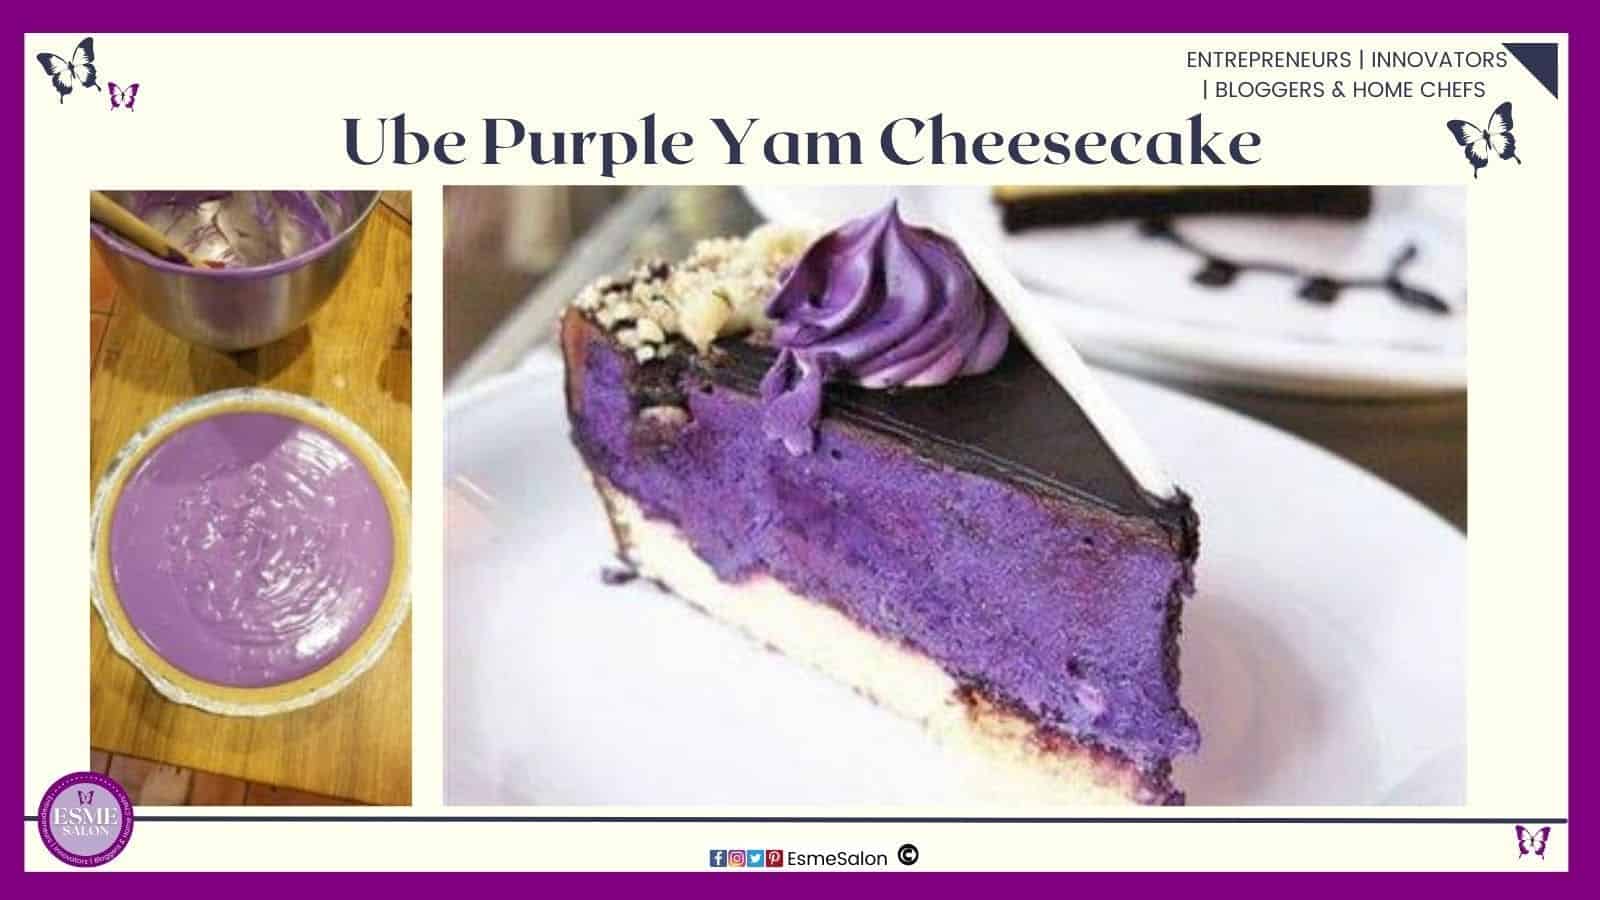 an image of a purple cheesecake made from ube - a purple yam